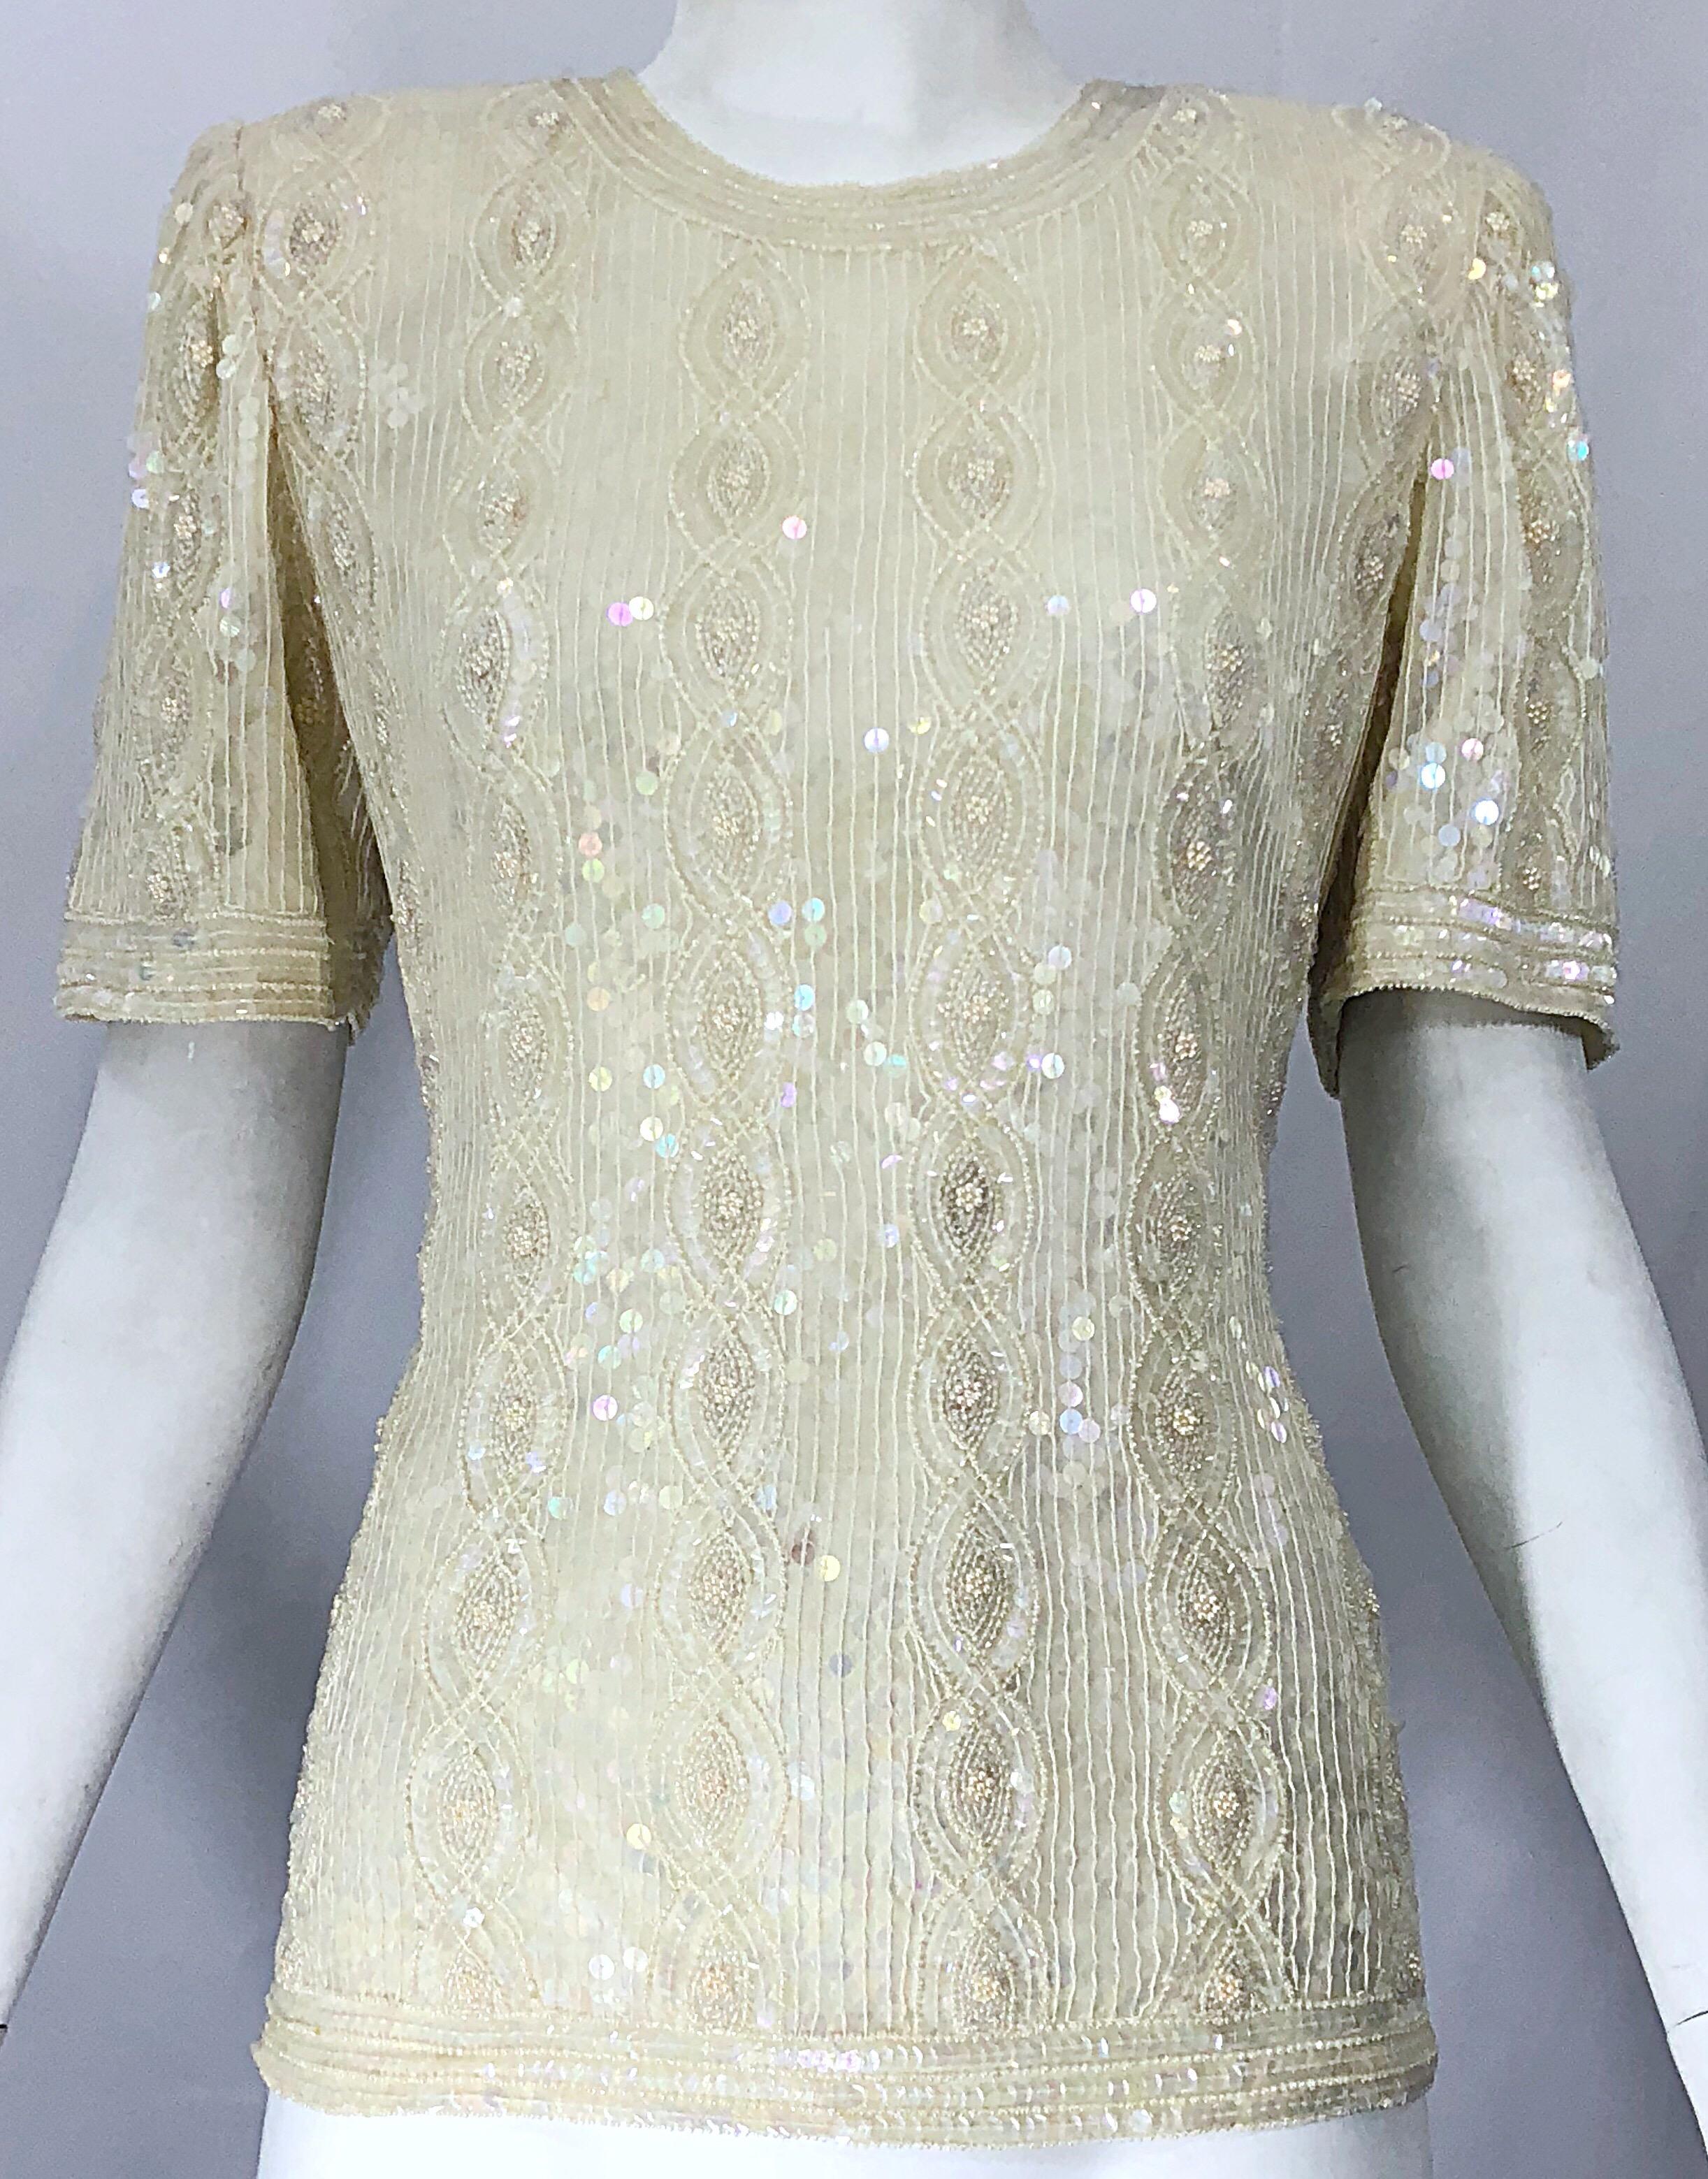 Beautiful vintage ivory / off-white sequined, beaded, and pearl encrusted silk shirt! Features thousands of hand-sewn iridescent sequins throughout. Pearls and beads scattered throughout. Hidden zipper up the back with hook-and-eye closure. Very